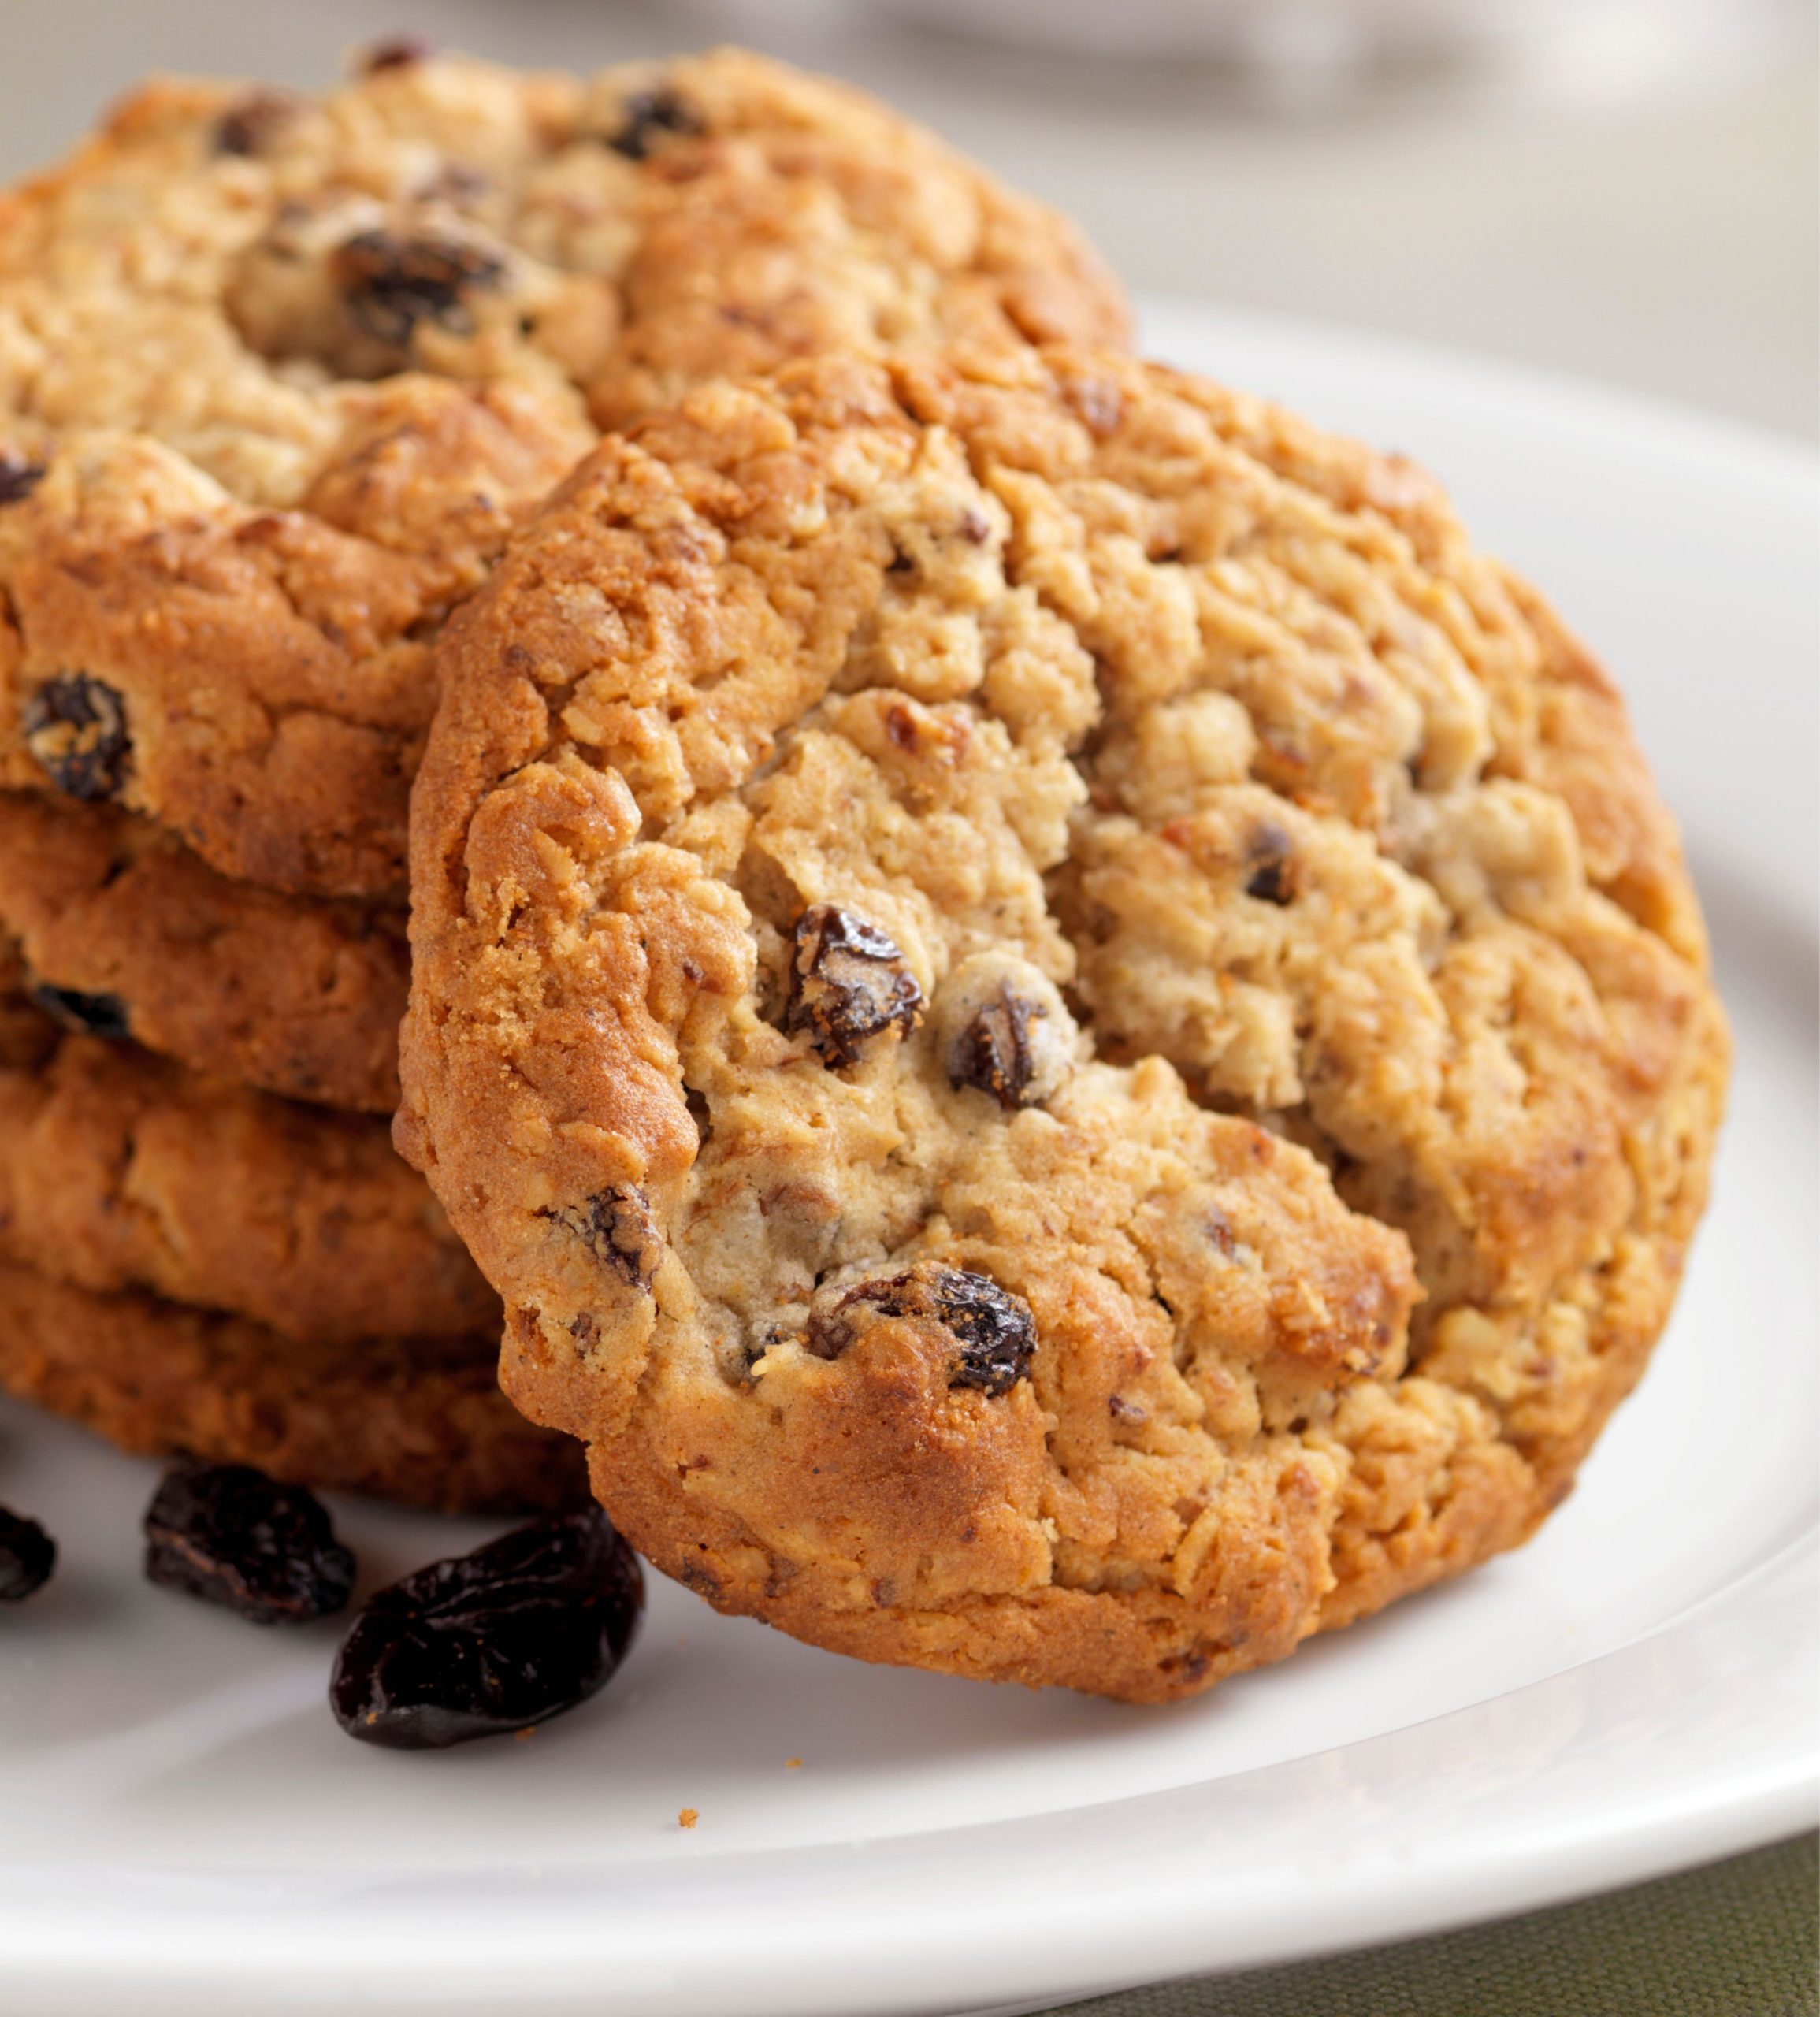 Kids' Favorite Chewy Oatmeal Cookie